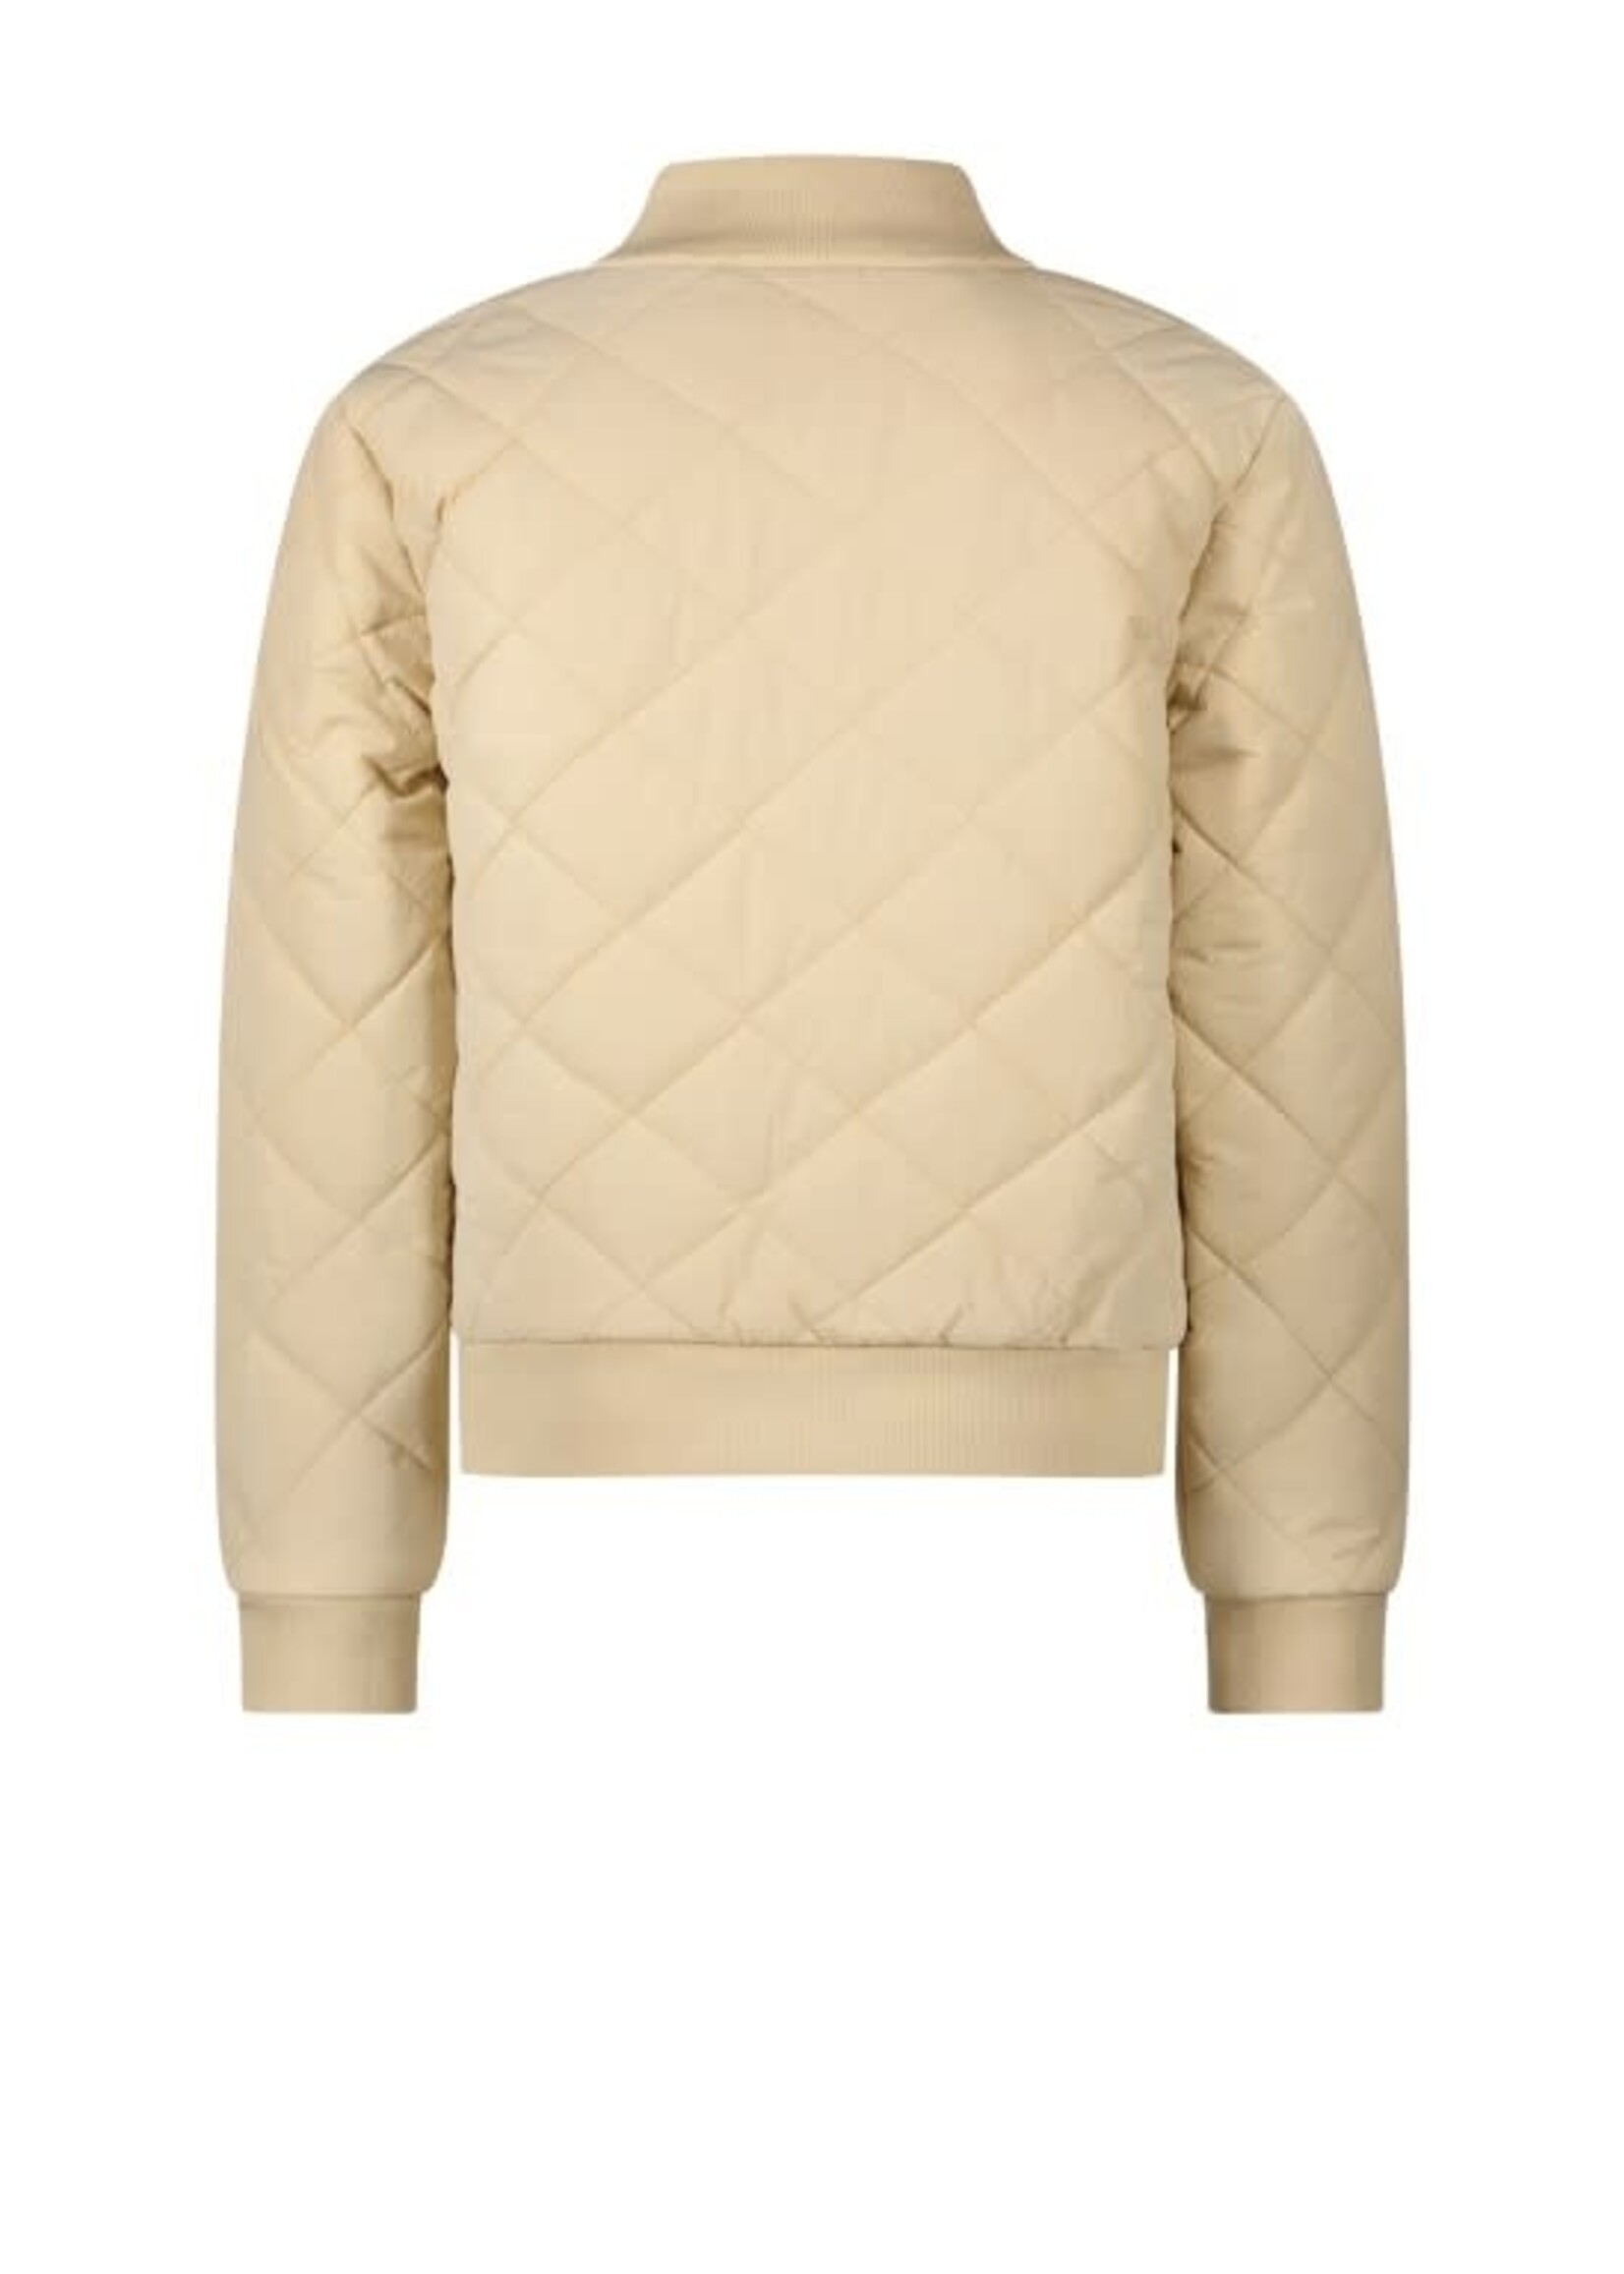 Le Chic Le Chic BRIAN padded bomber L312-6201 Light Sand